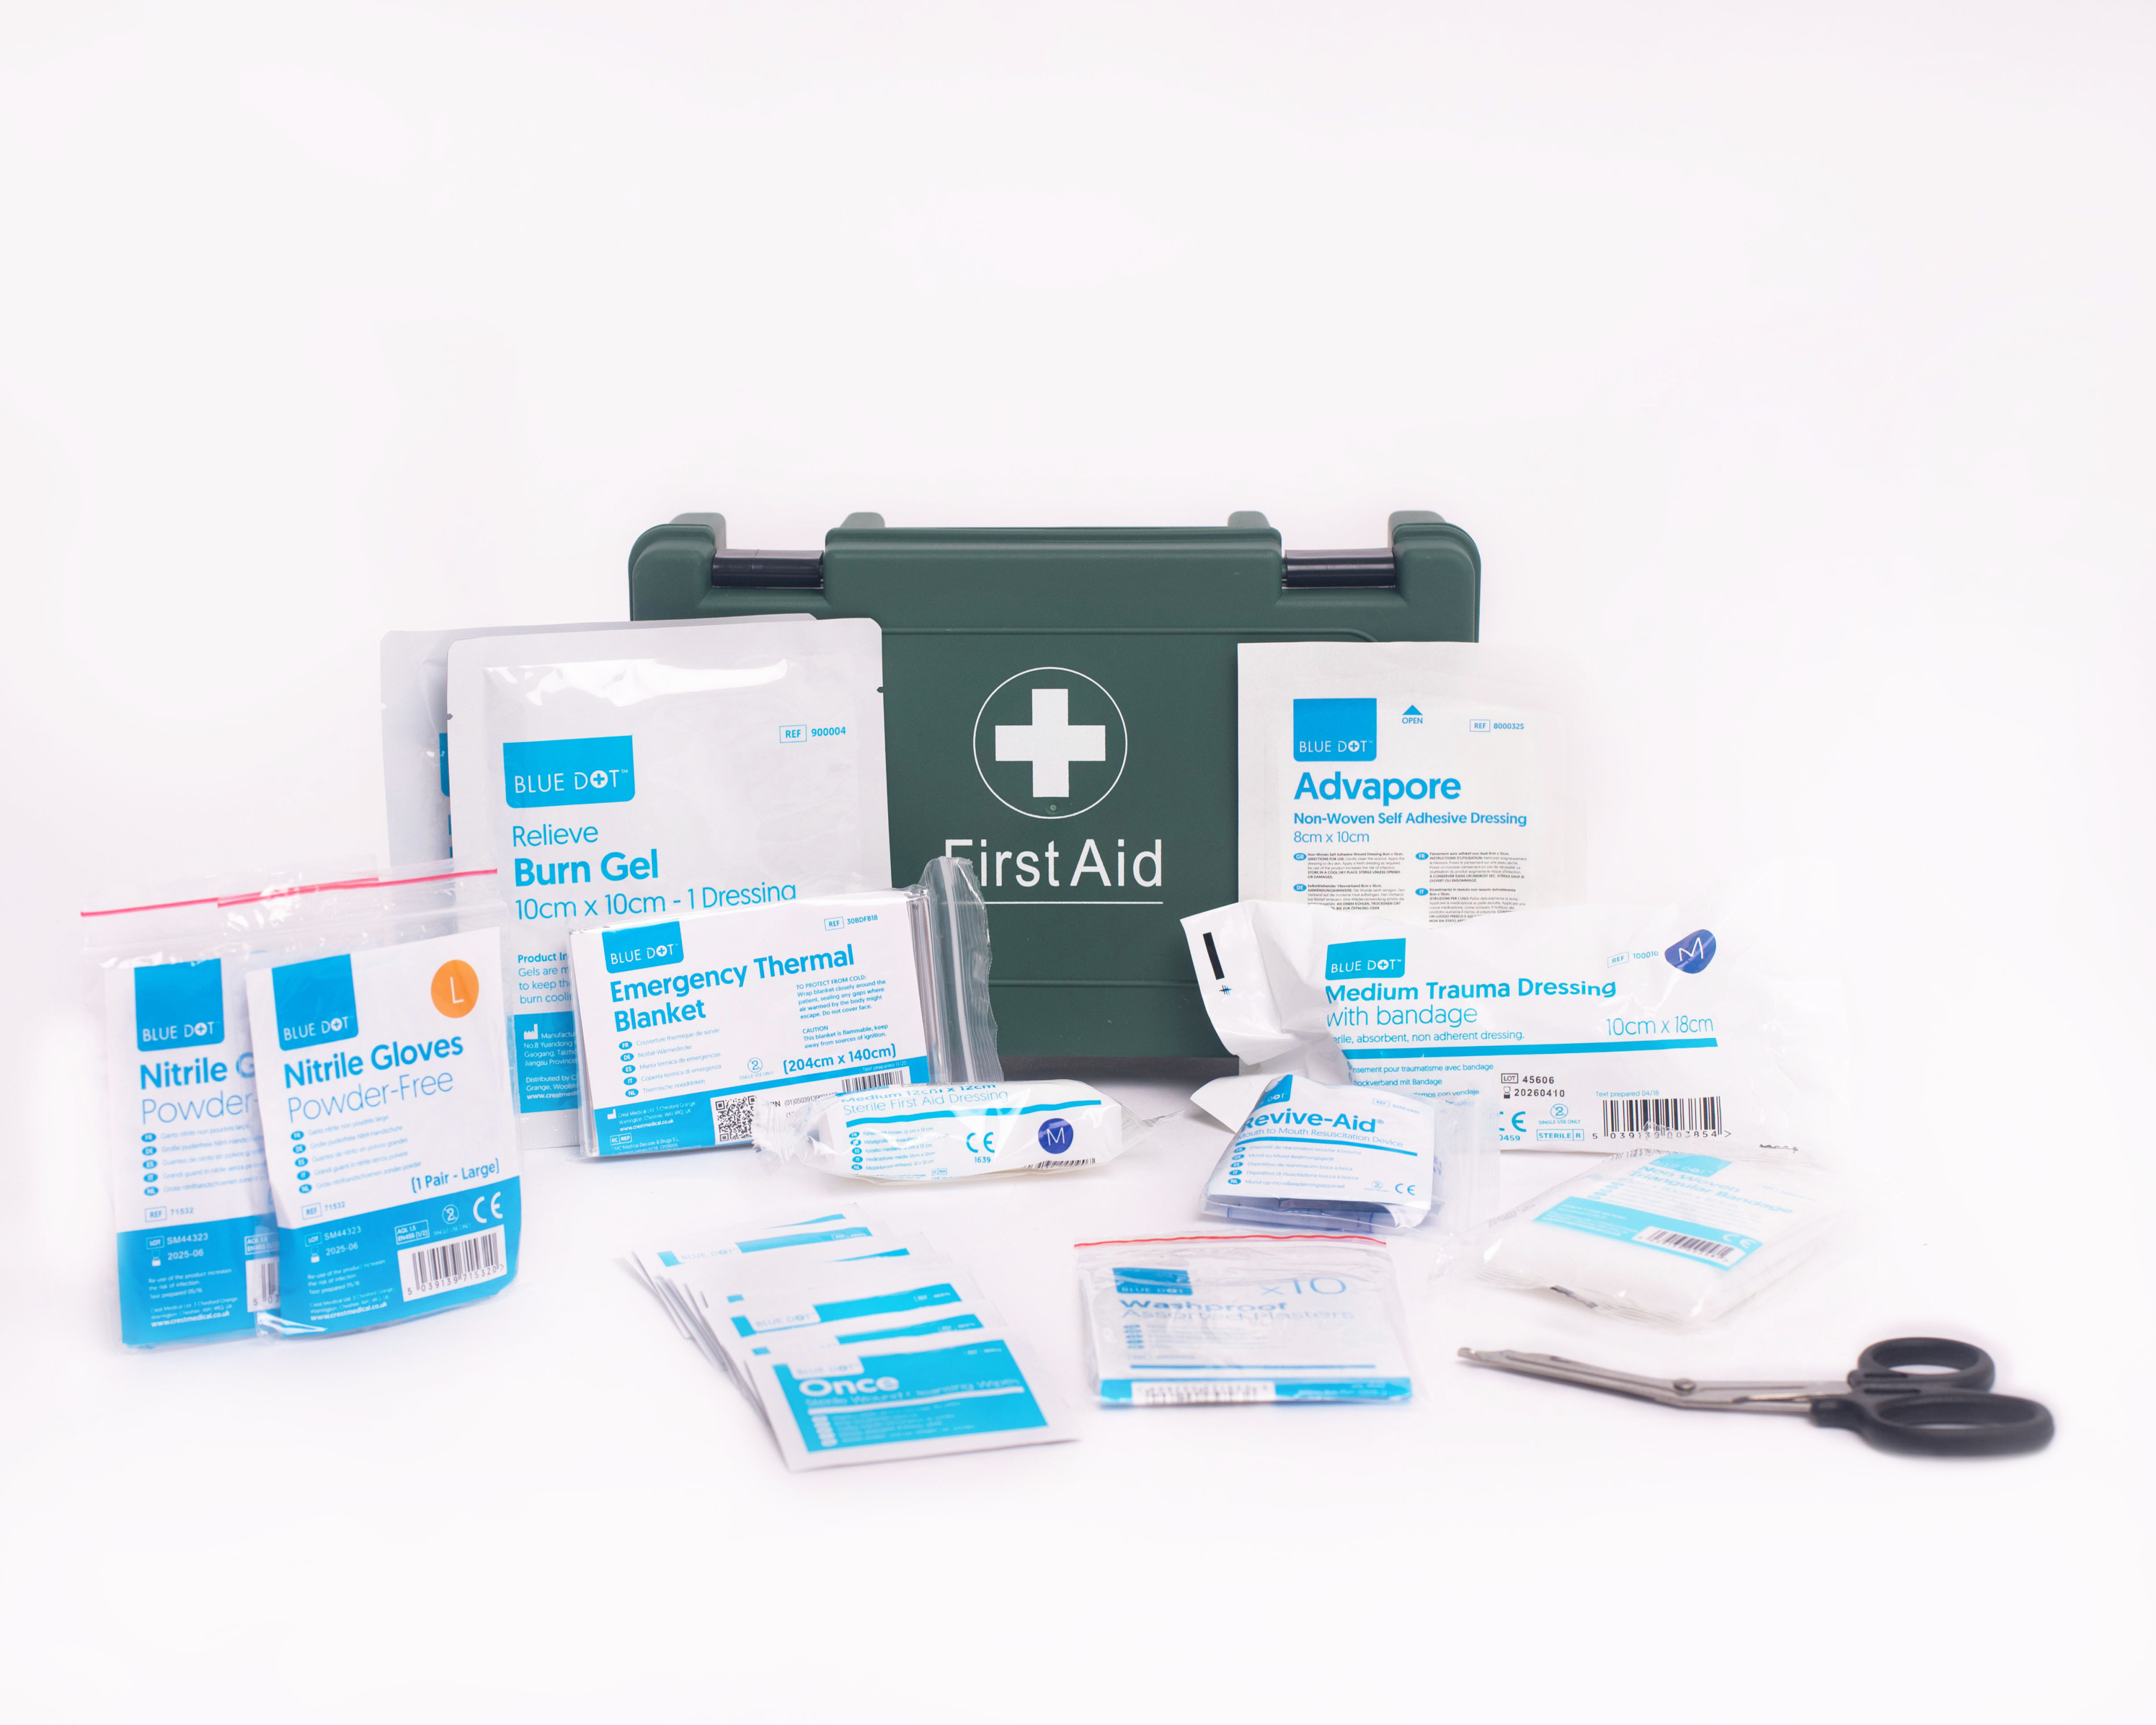 Blue Dot BS 8599-1 Travel First Aid Kit